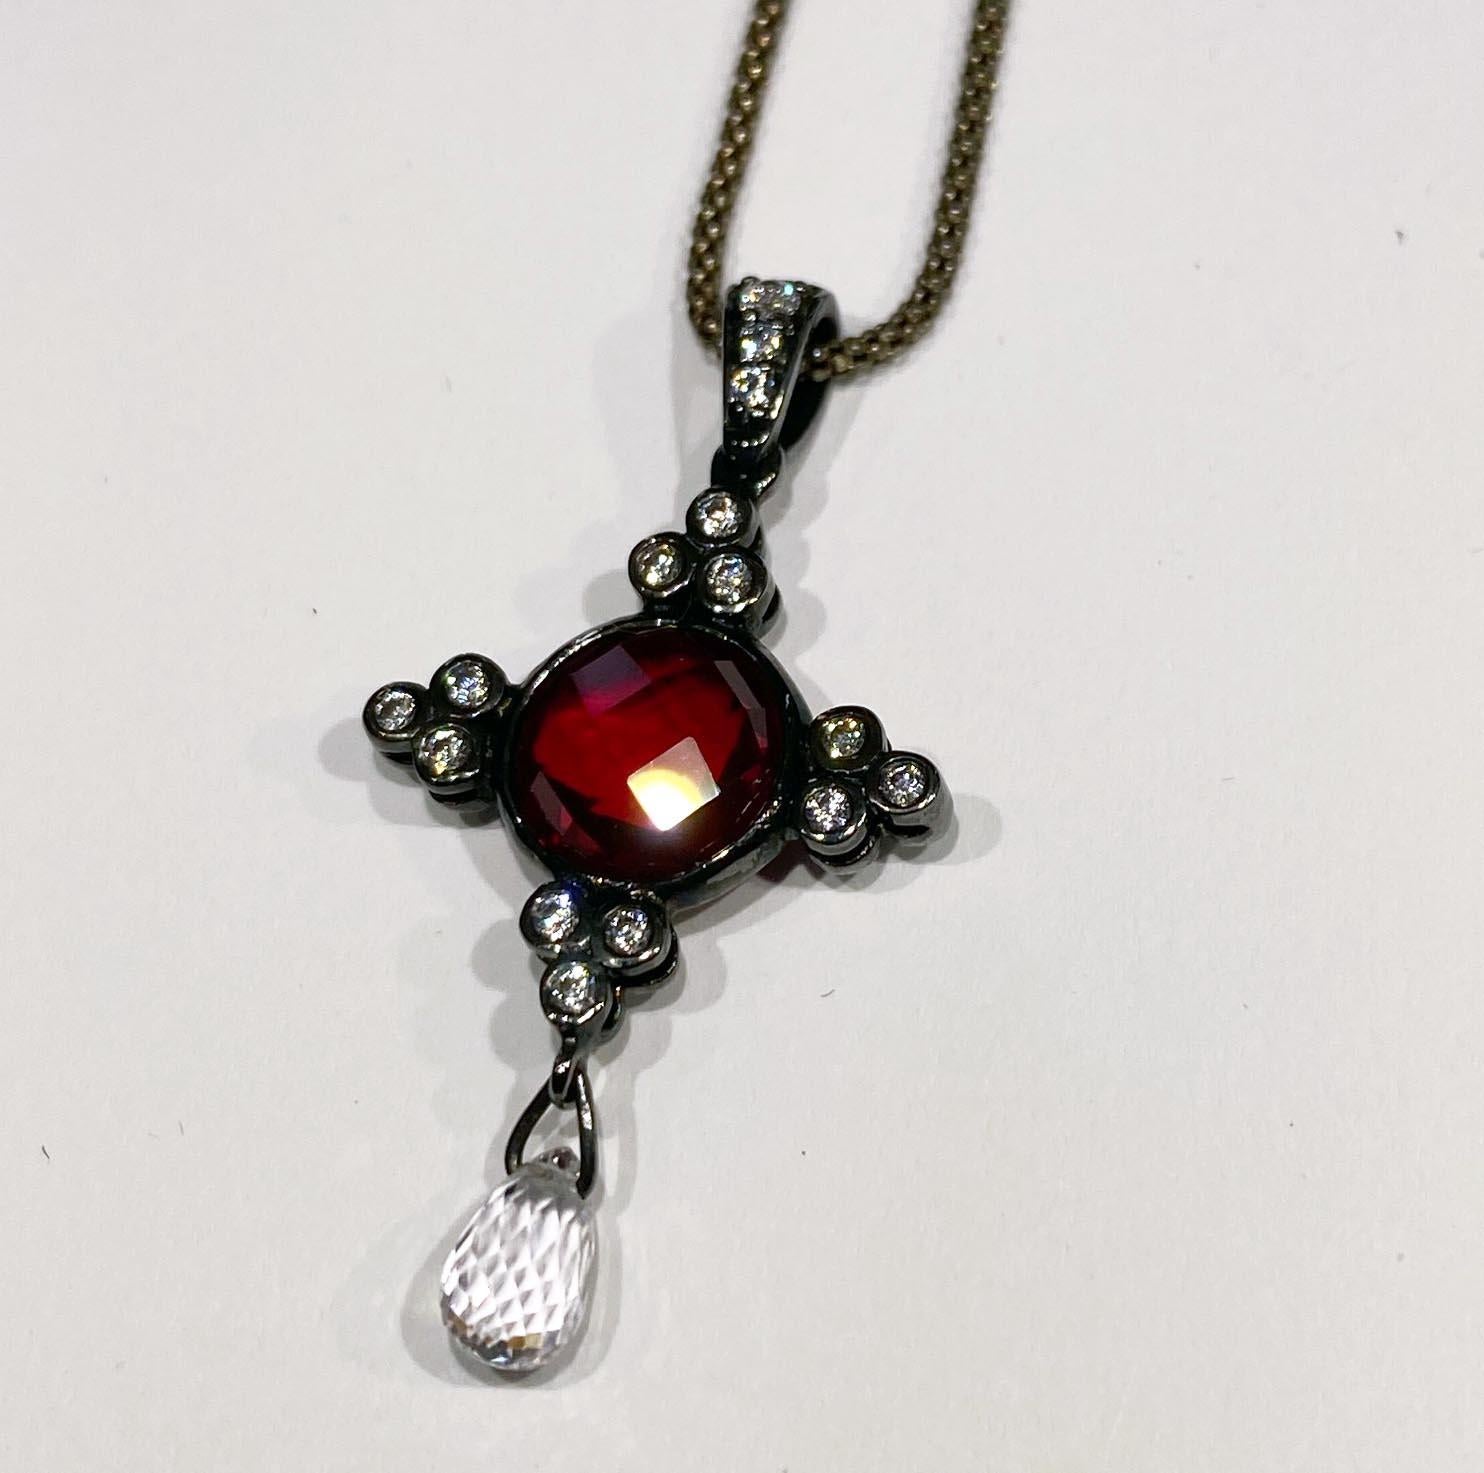 A Double Sided Cultured Sapphire & Ruby Pendant set in Blackened Silver
This Double Sided Cultured Sapphire & Ruby Pendant set in Blackened Silver Features a 3.04 Carat Round Checkerboard Cut Cultured Ruby accented by 27 Cultured White Round